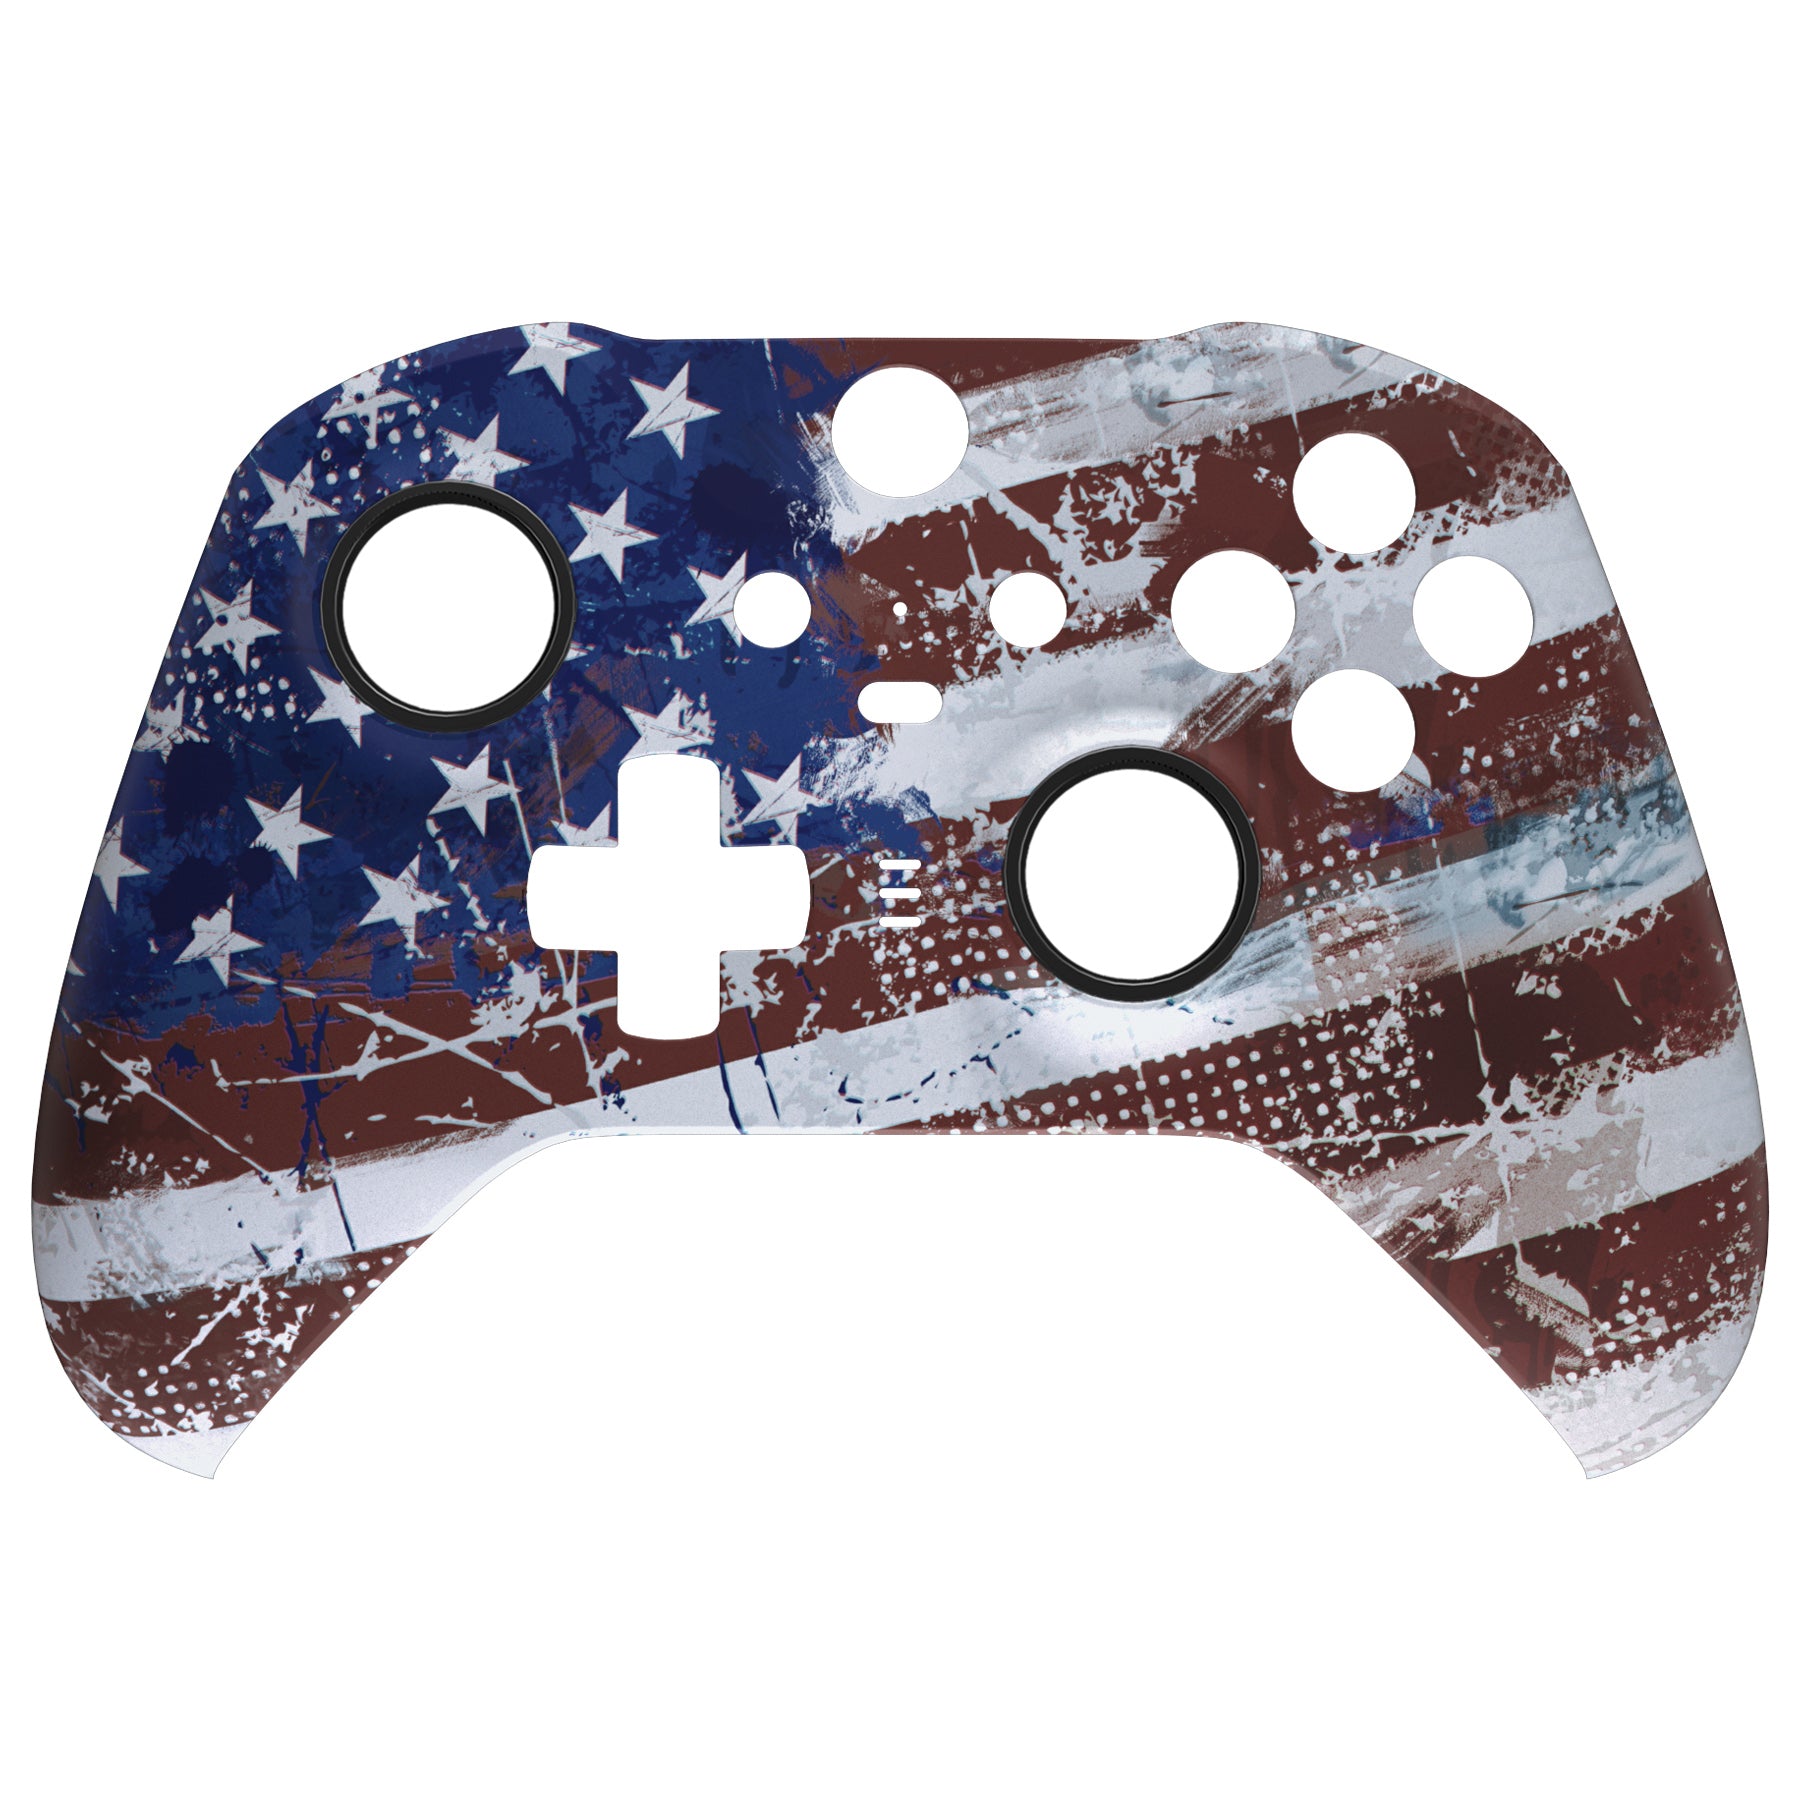 eXtremeRate Retail Impression US Flag Faceplate Cover, Soft Touch Front Housing Shell Case Replacement Kit for Xbox One Elite Series 2 Controller Model 1797 - Thumbstick Accent Rings Included - ELT146